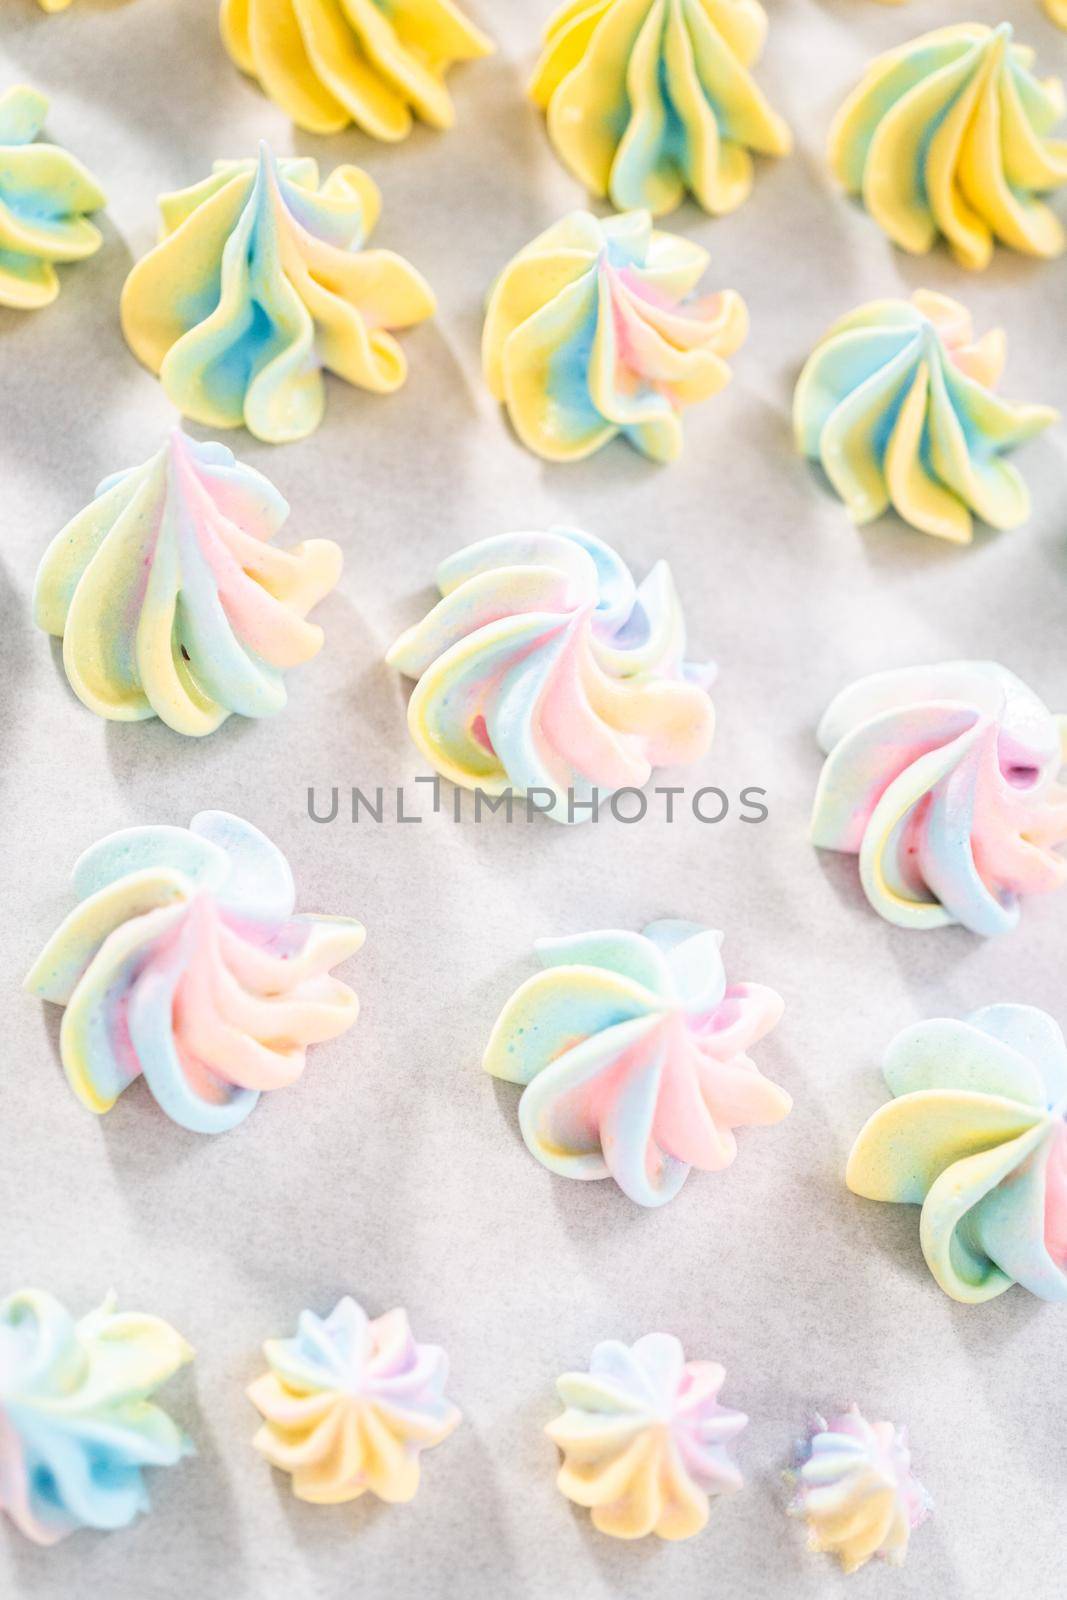 Freshly baked unicorn meringue cookies on a baking sheet with a parchment paper.